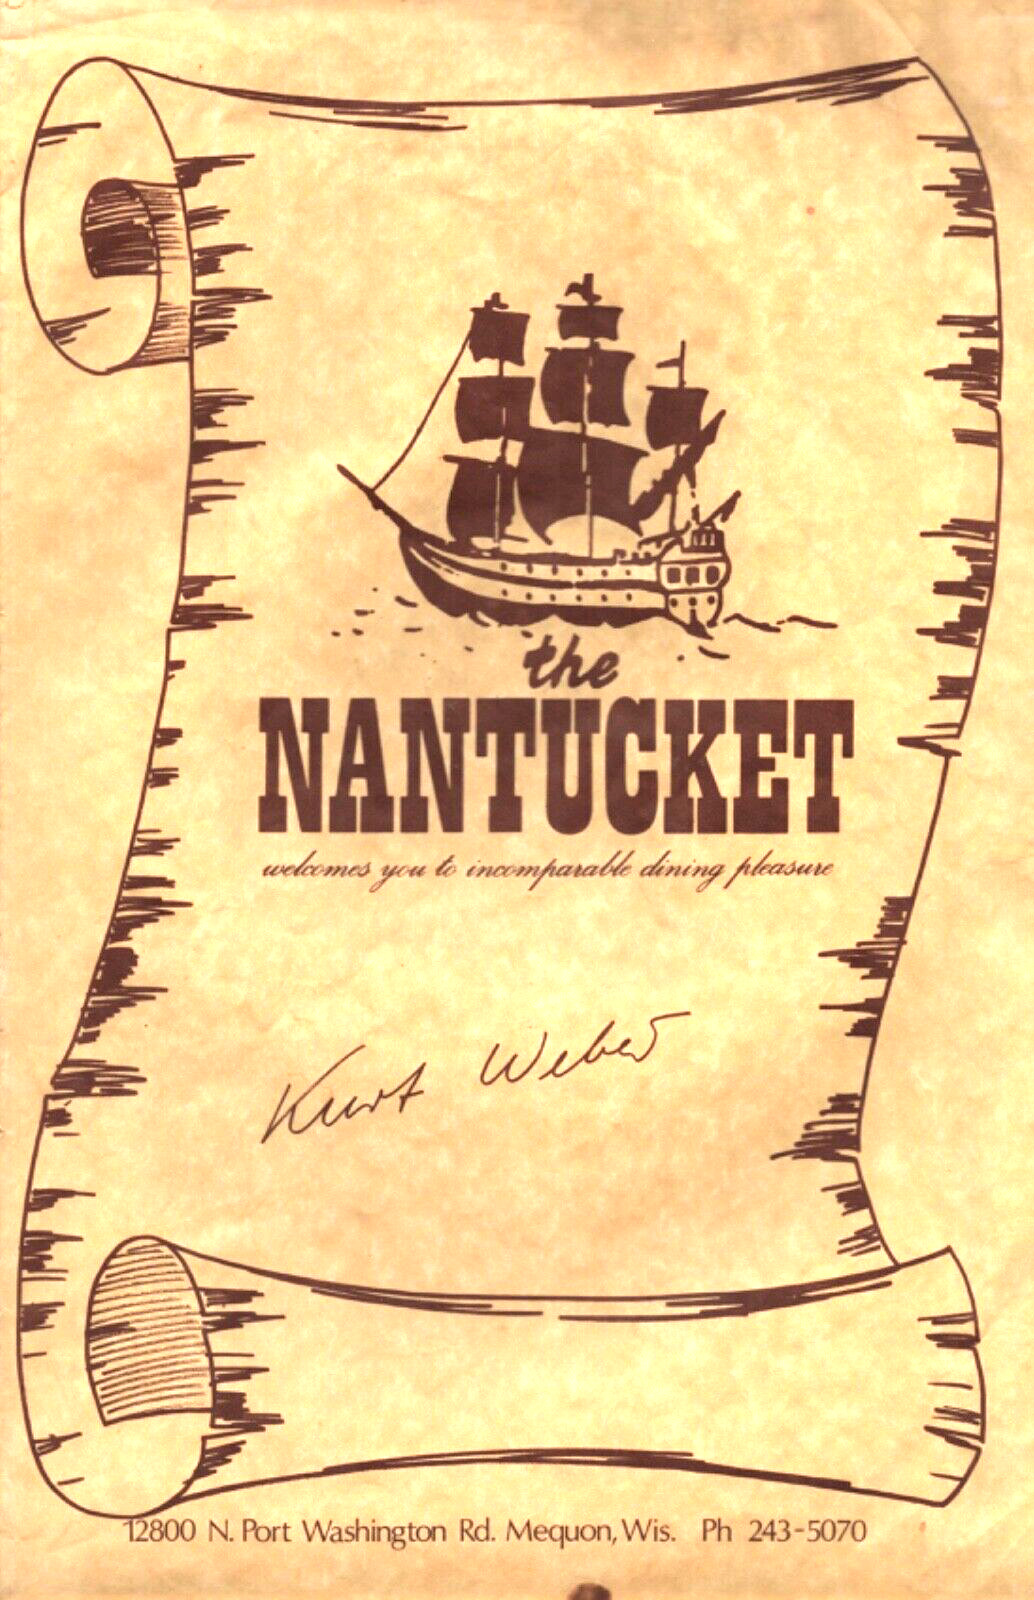 1980s THE NANTUCKET vintage restaurant menu MEQUON, WISCONSIN steak and seafood